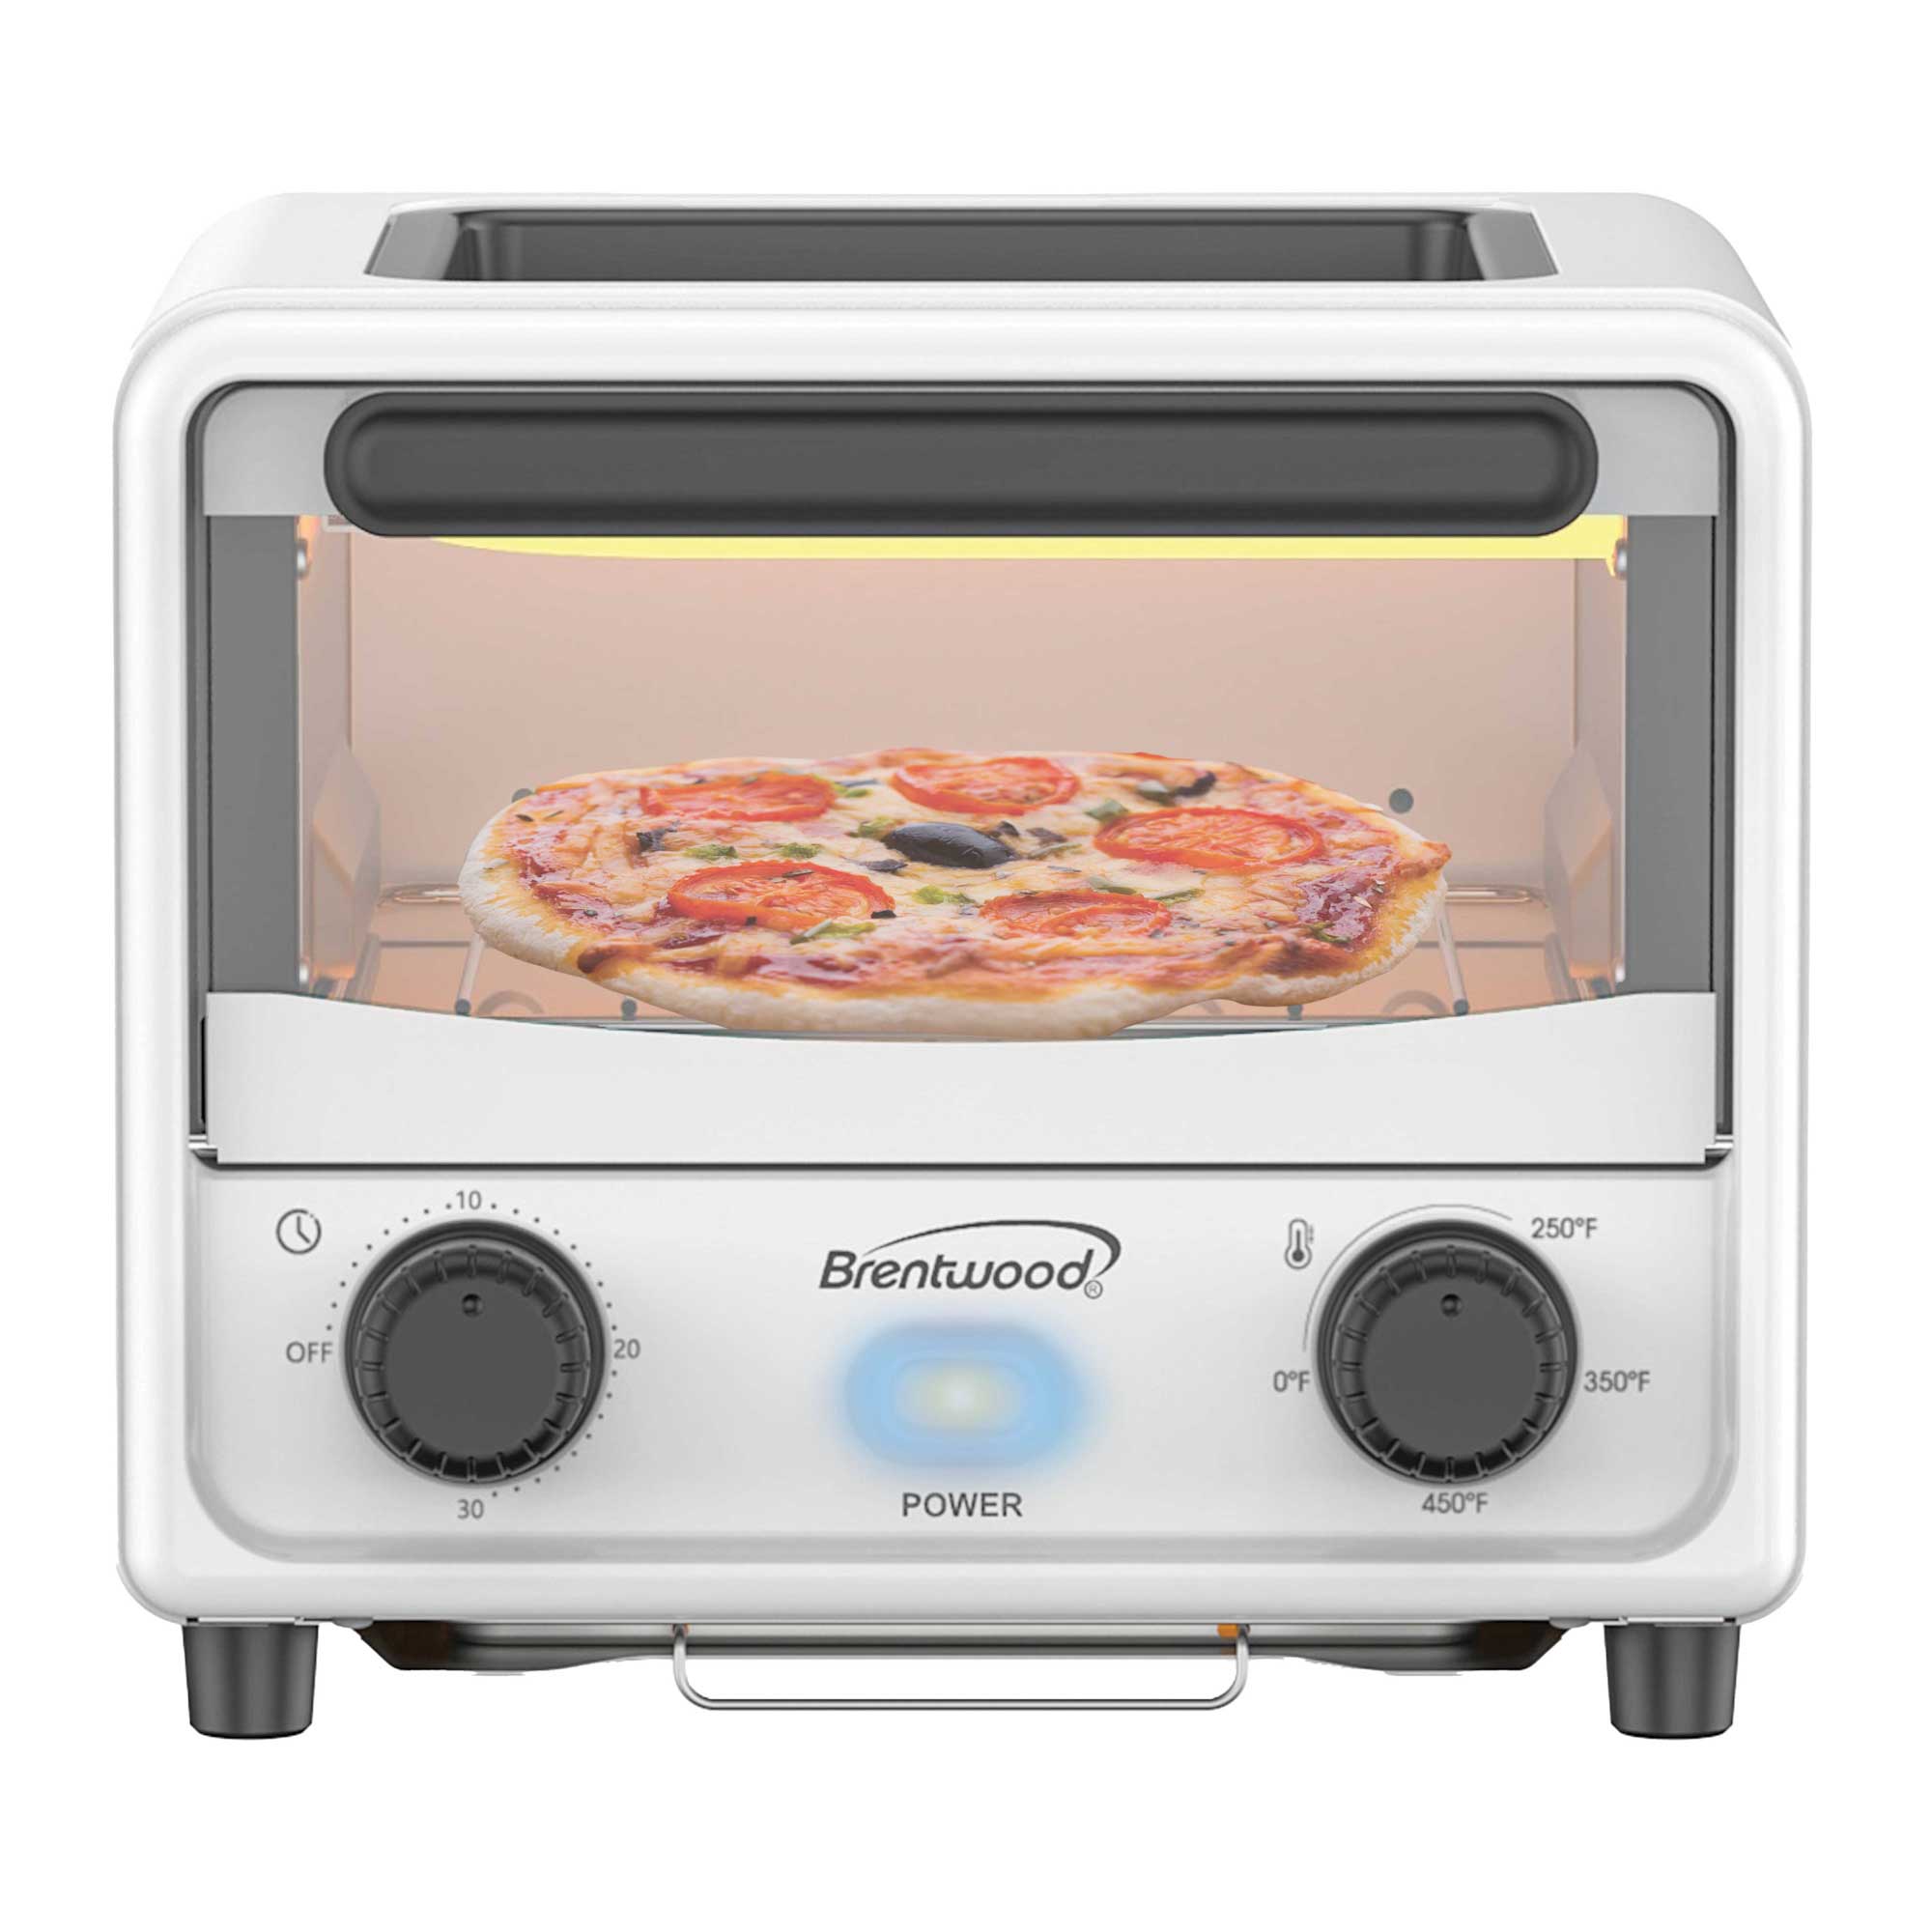 Coming Soon - Brentwood TS-3430W 3 Liter Stainless Steel Mini Toaster Oven, White